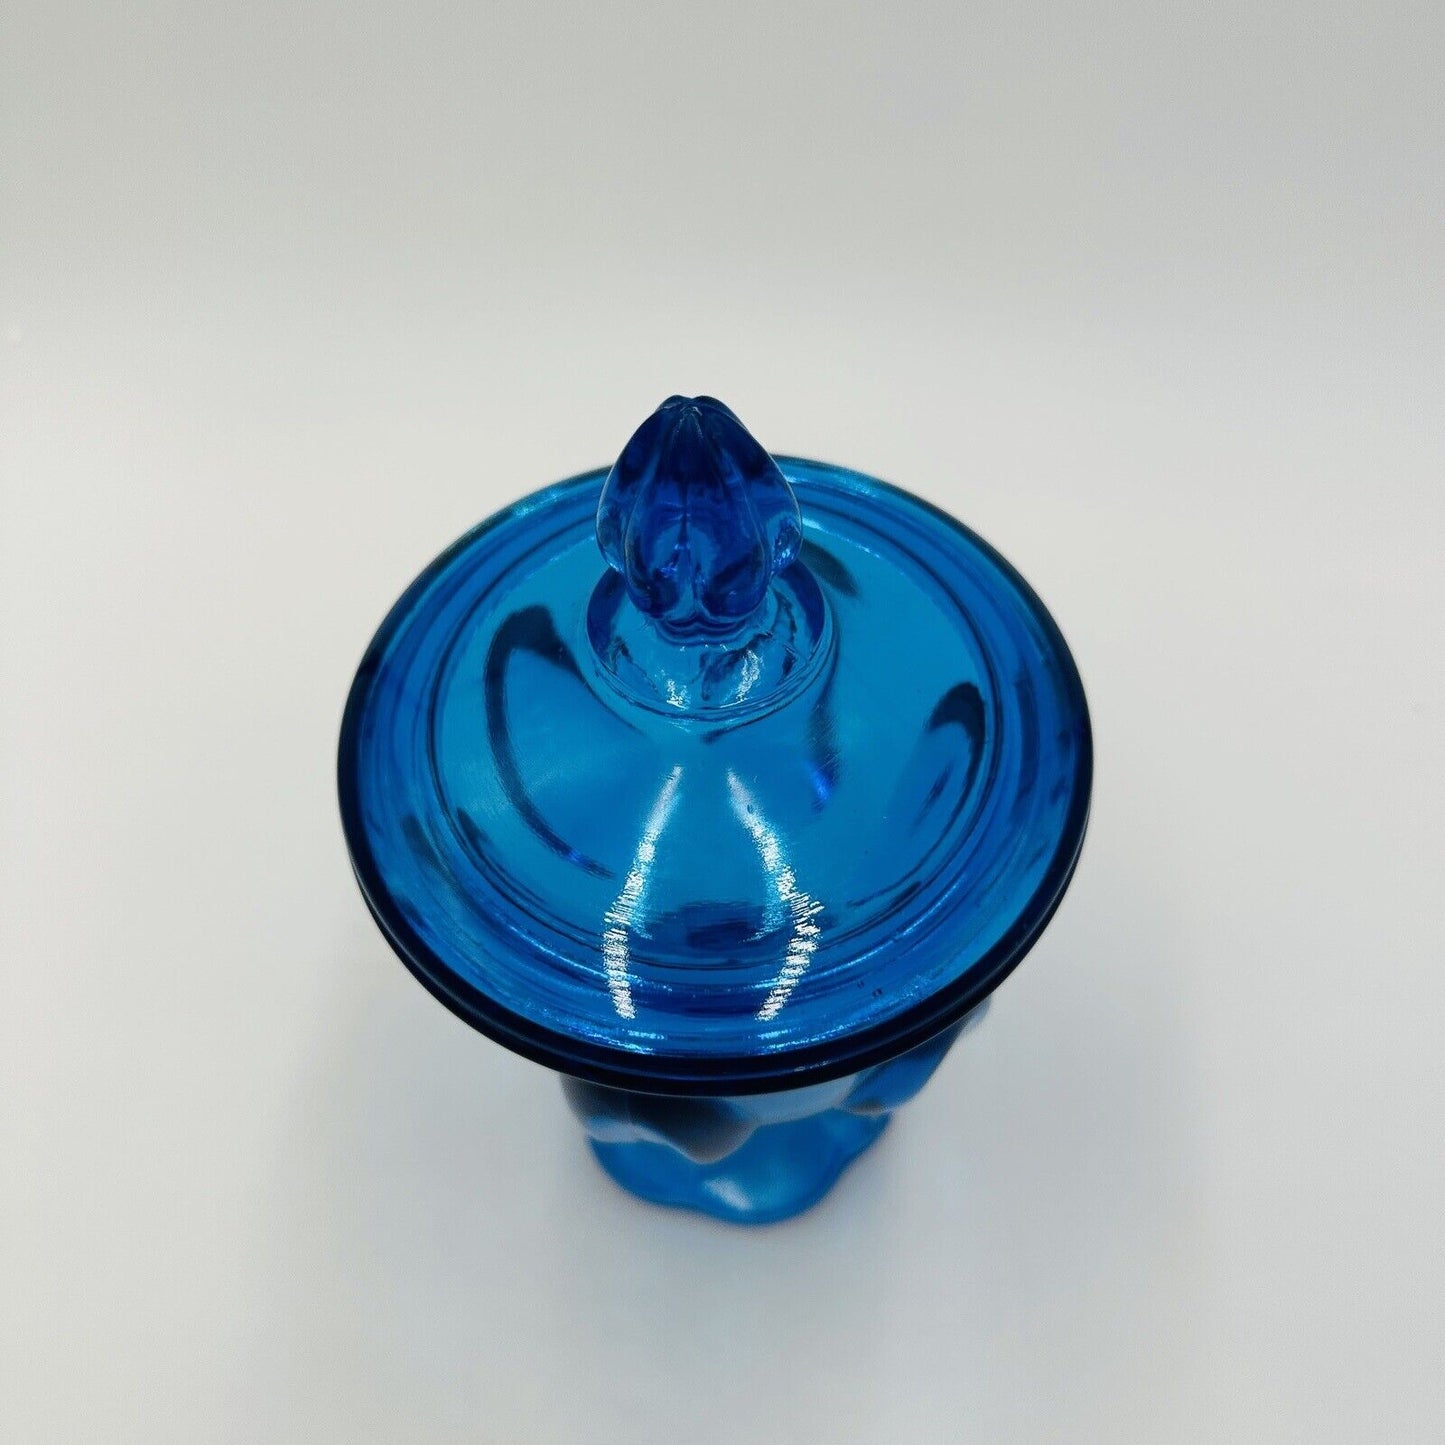 L. E. Smith Candy Dish Simplicity Pattern Petal Covered Lidded Compote 8" Blue